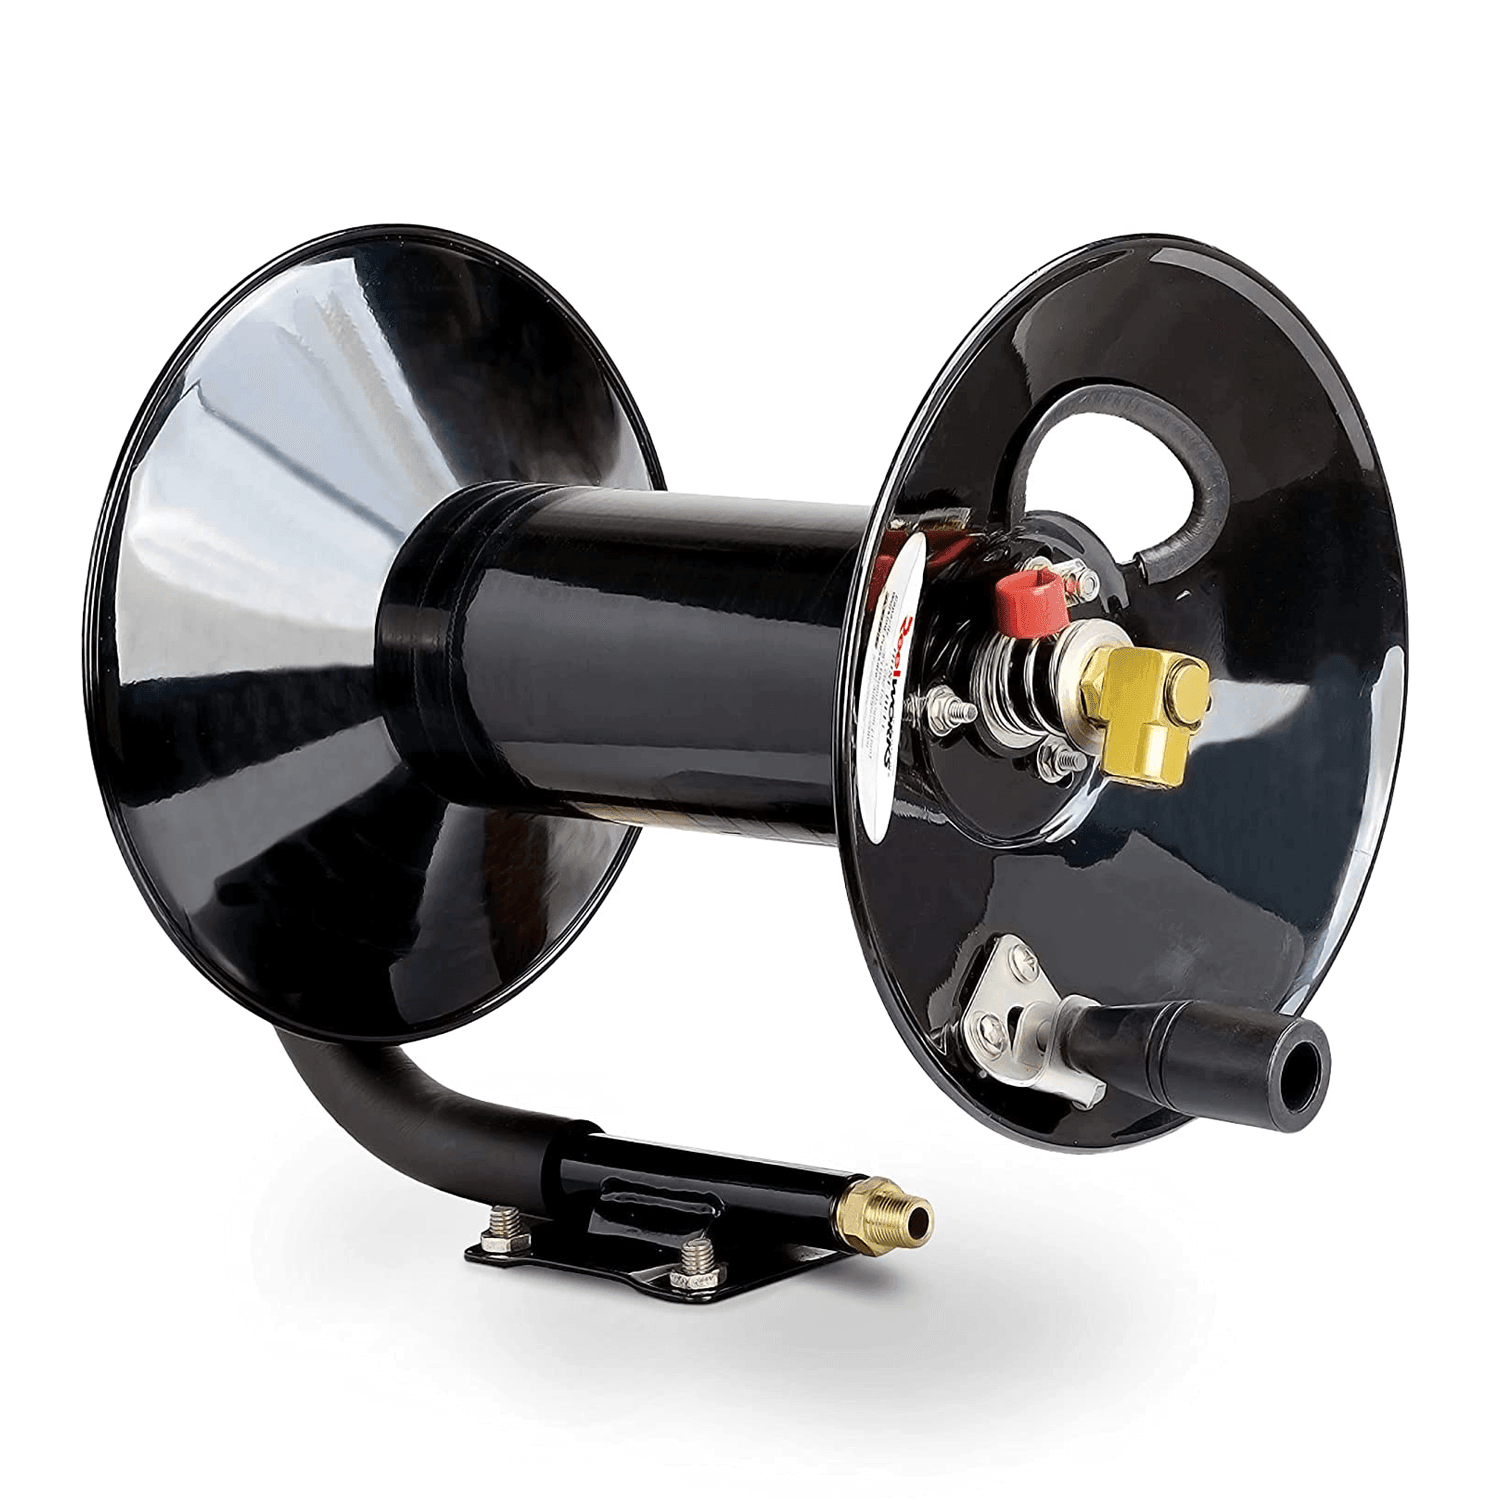 Goodyear Mountable Retractable Air Hose Reel - 3/8 x 50' Ft, 3' Ft Lead-In  Hose, 1/4 NPT Connections 